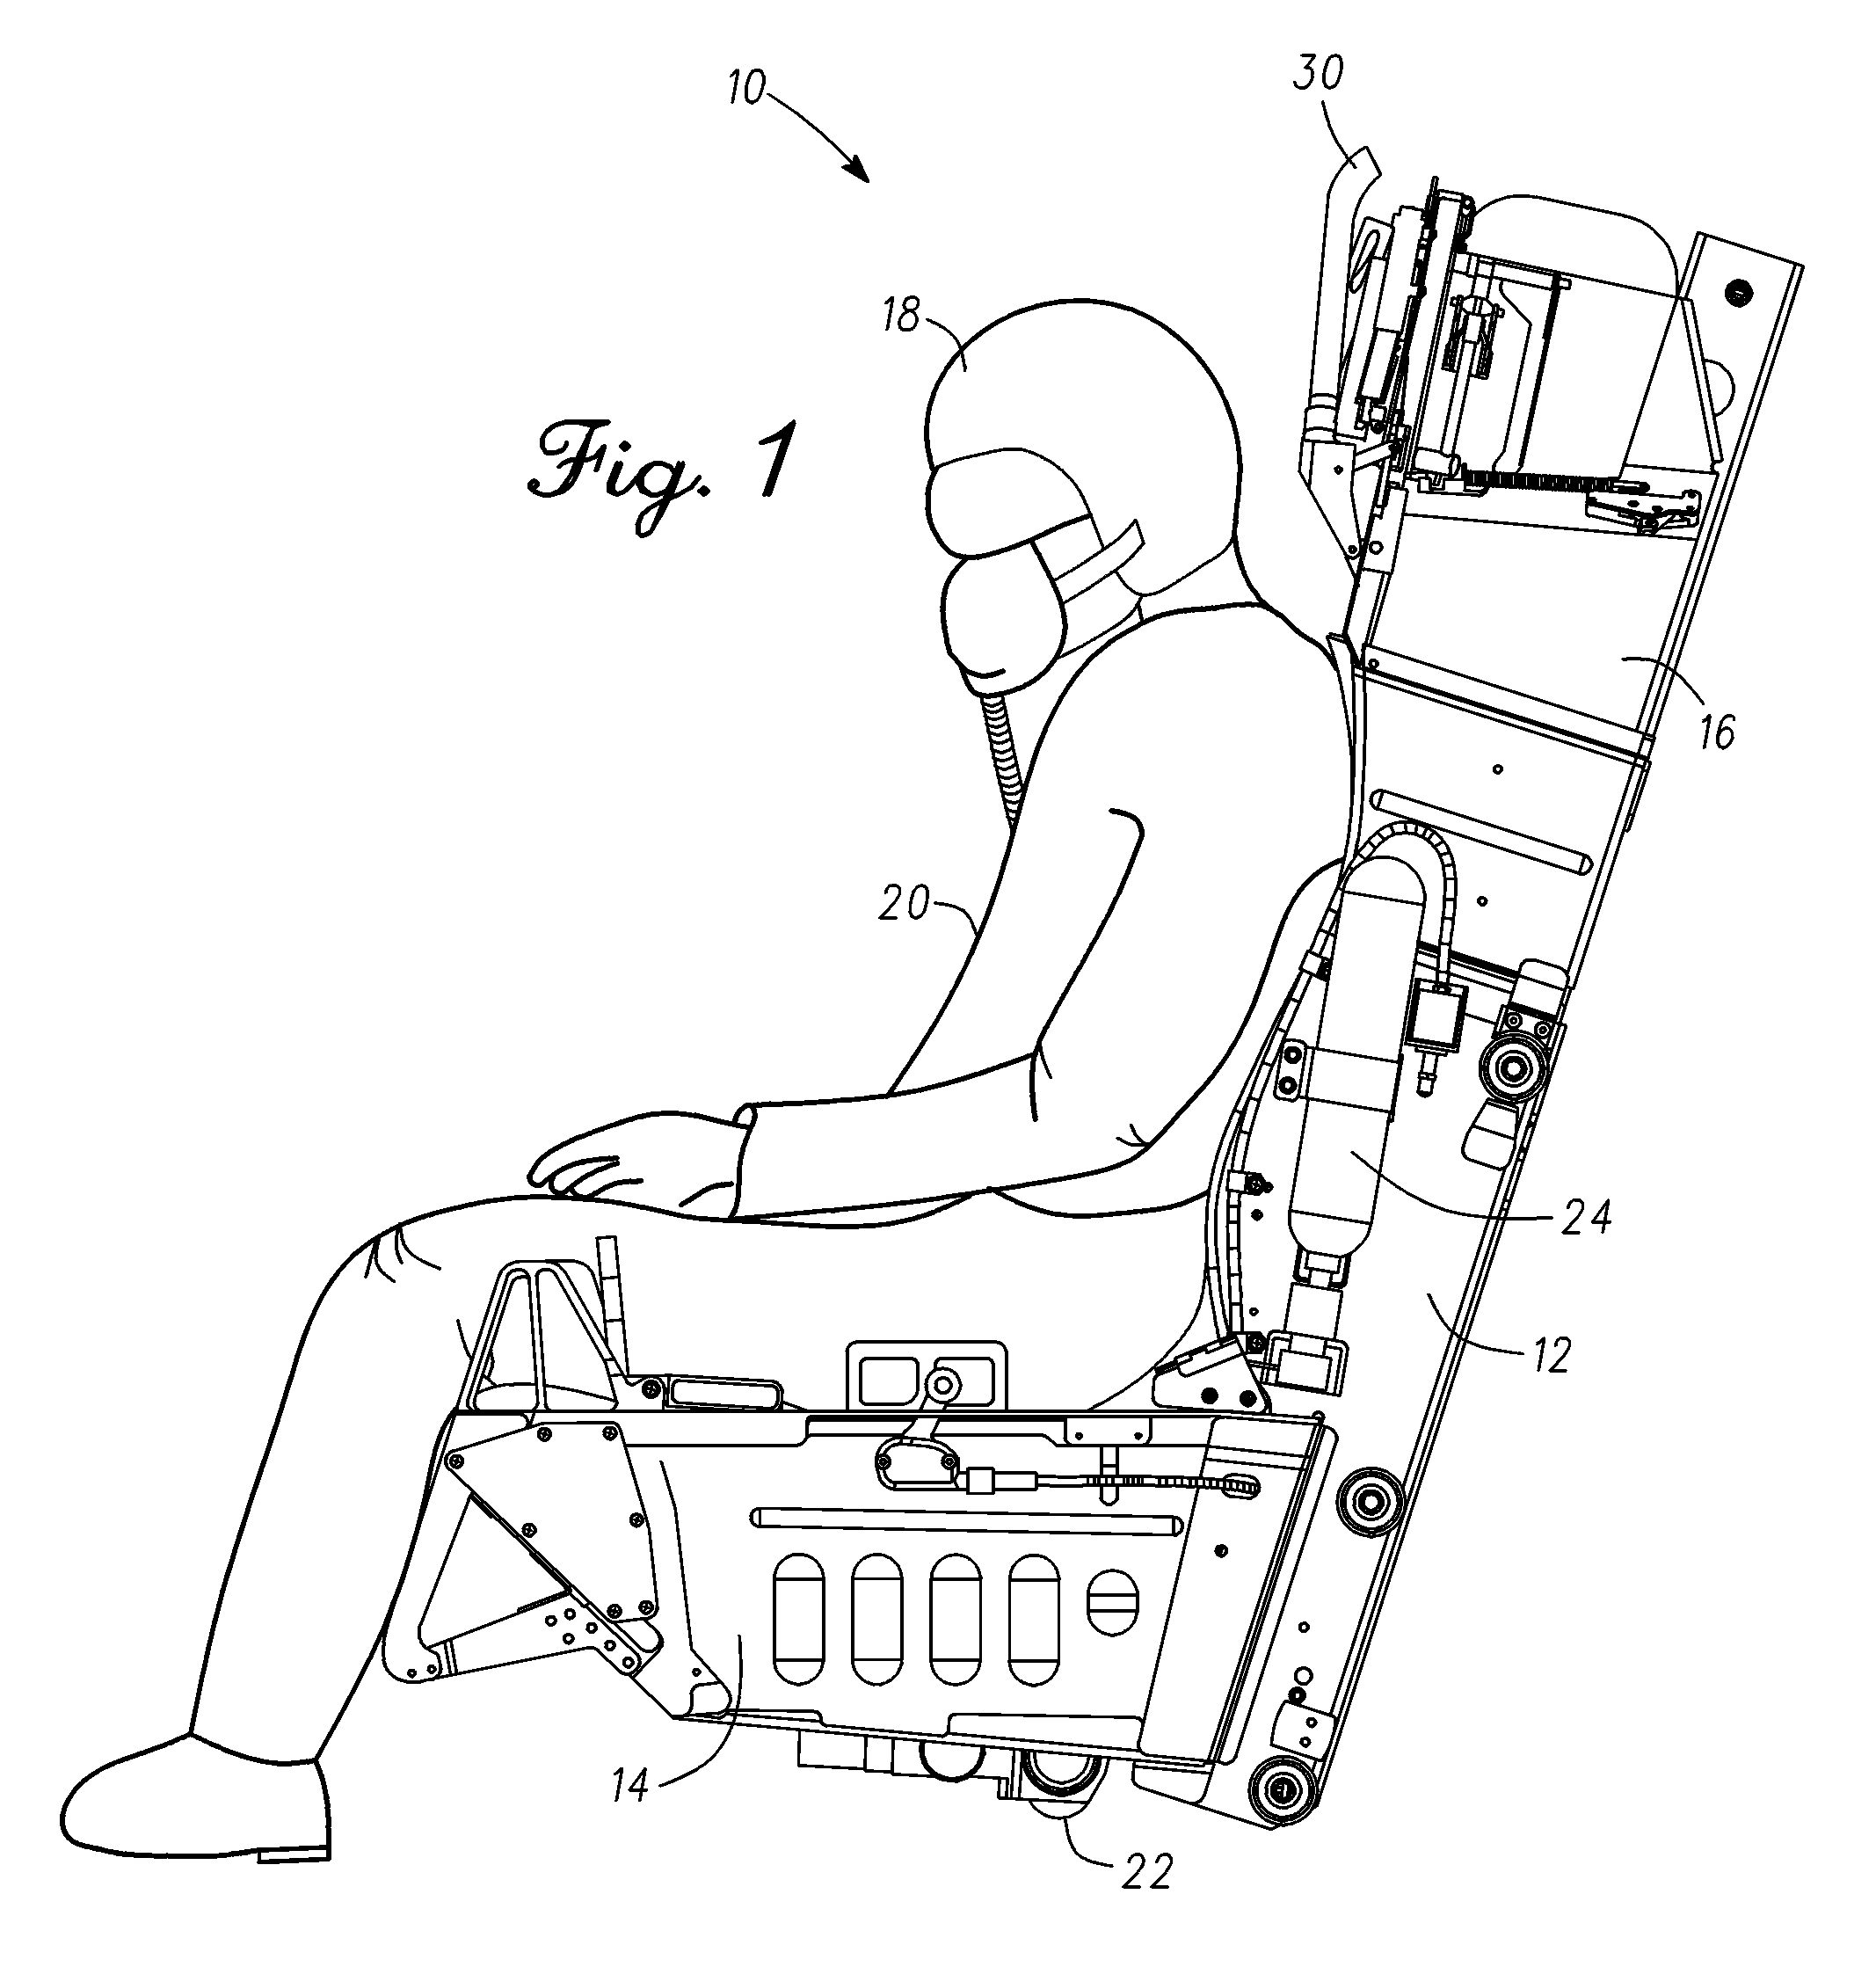 Aircraft ejection seat with moveable headrest